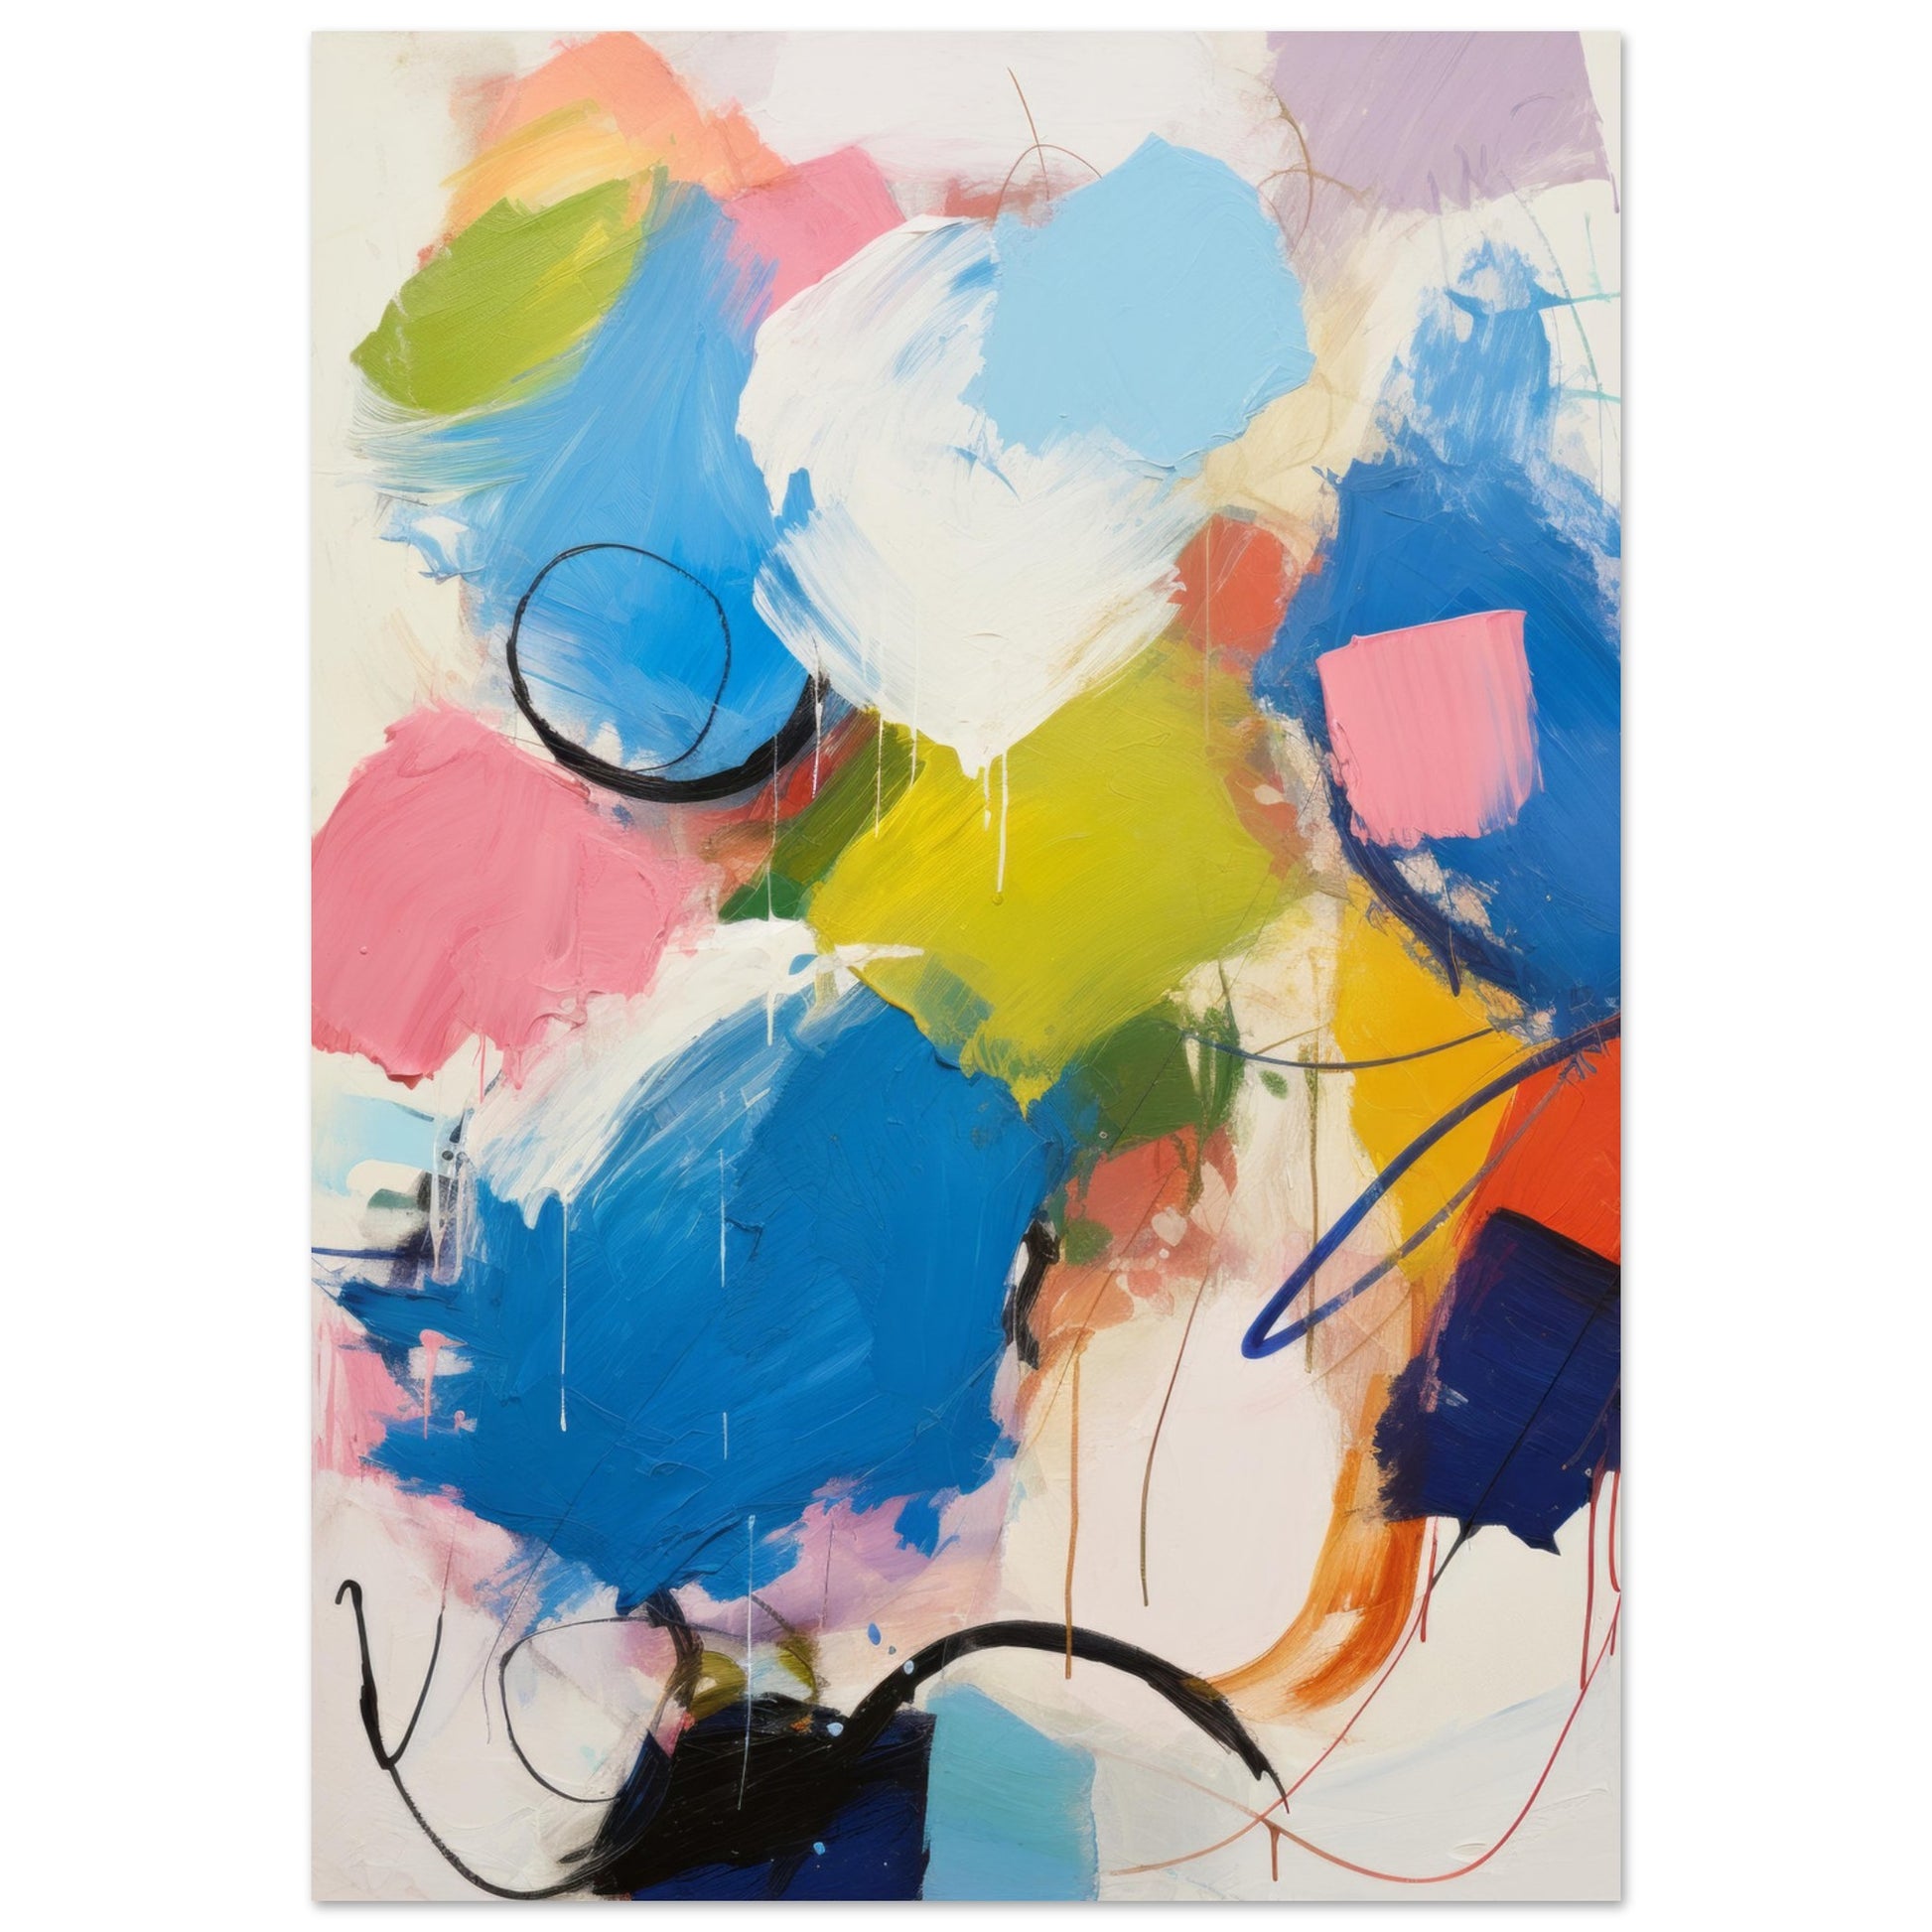 Modern abstract art "Distracted" featuring a vibrant mix of blue, pink, and yellow brush strokes and drips.